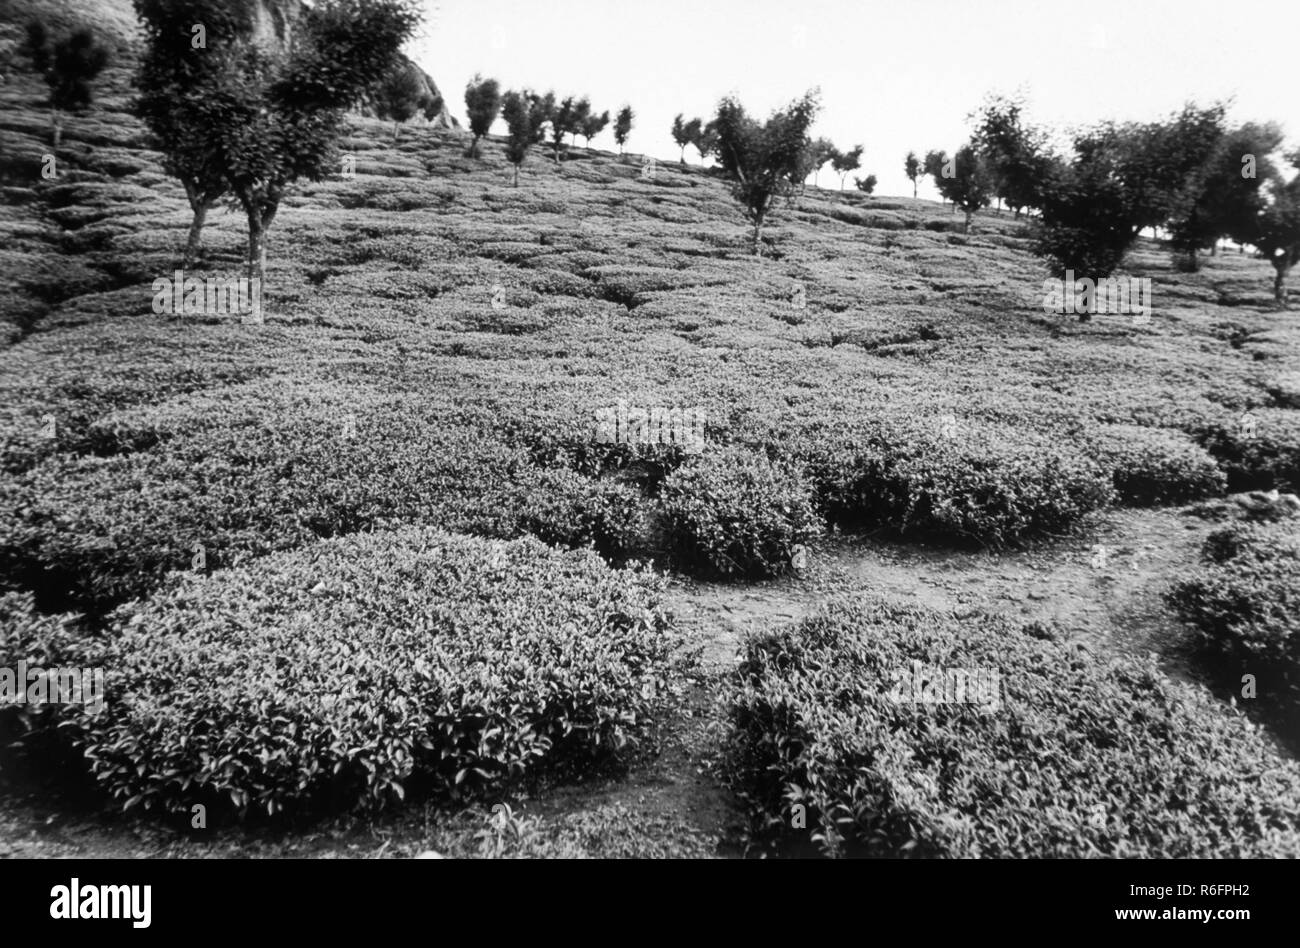 Ooty india Black and White Stock Photos & Images - Alamy